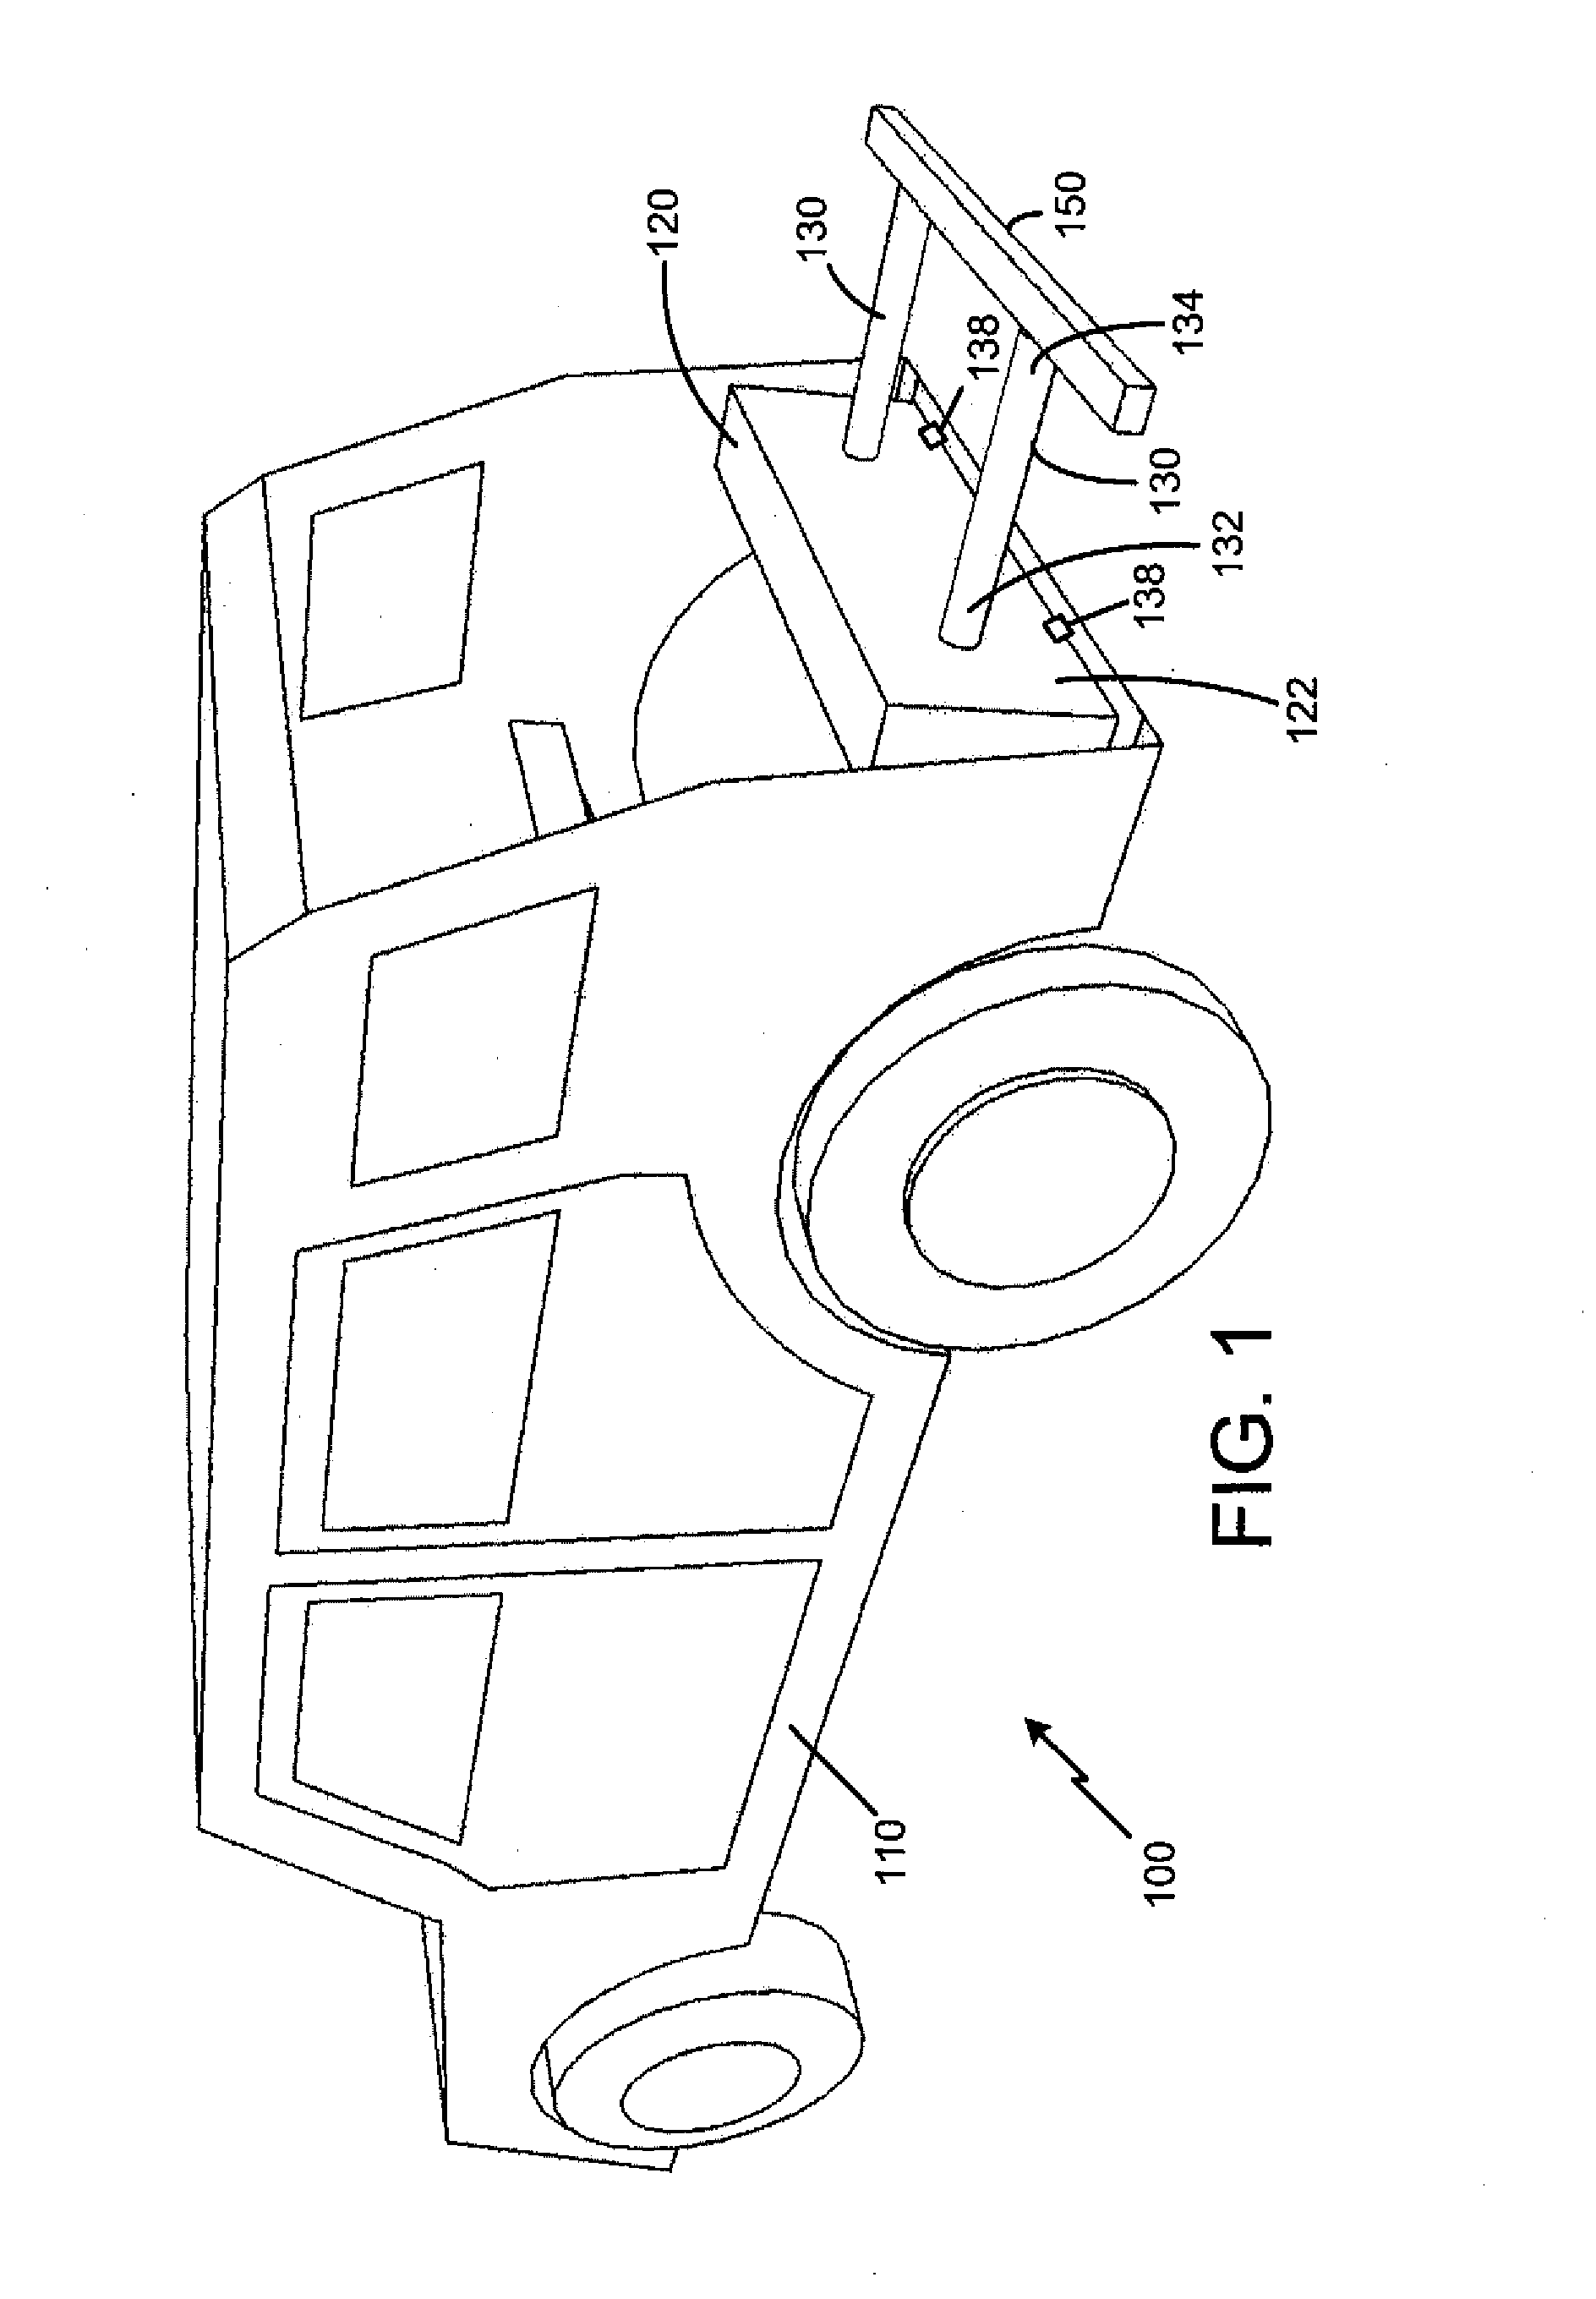 Method and Apparatus for an Attachable and Removable Crumple Zone